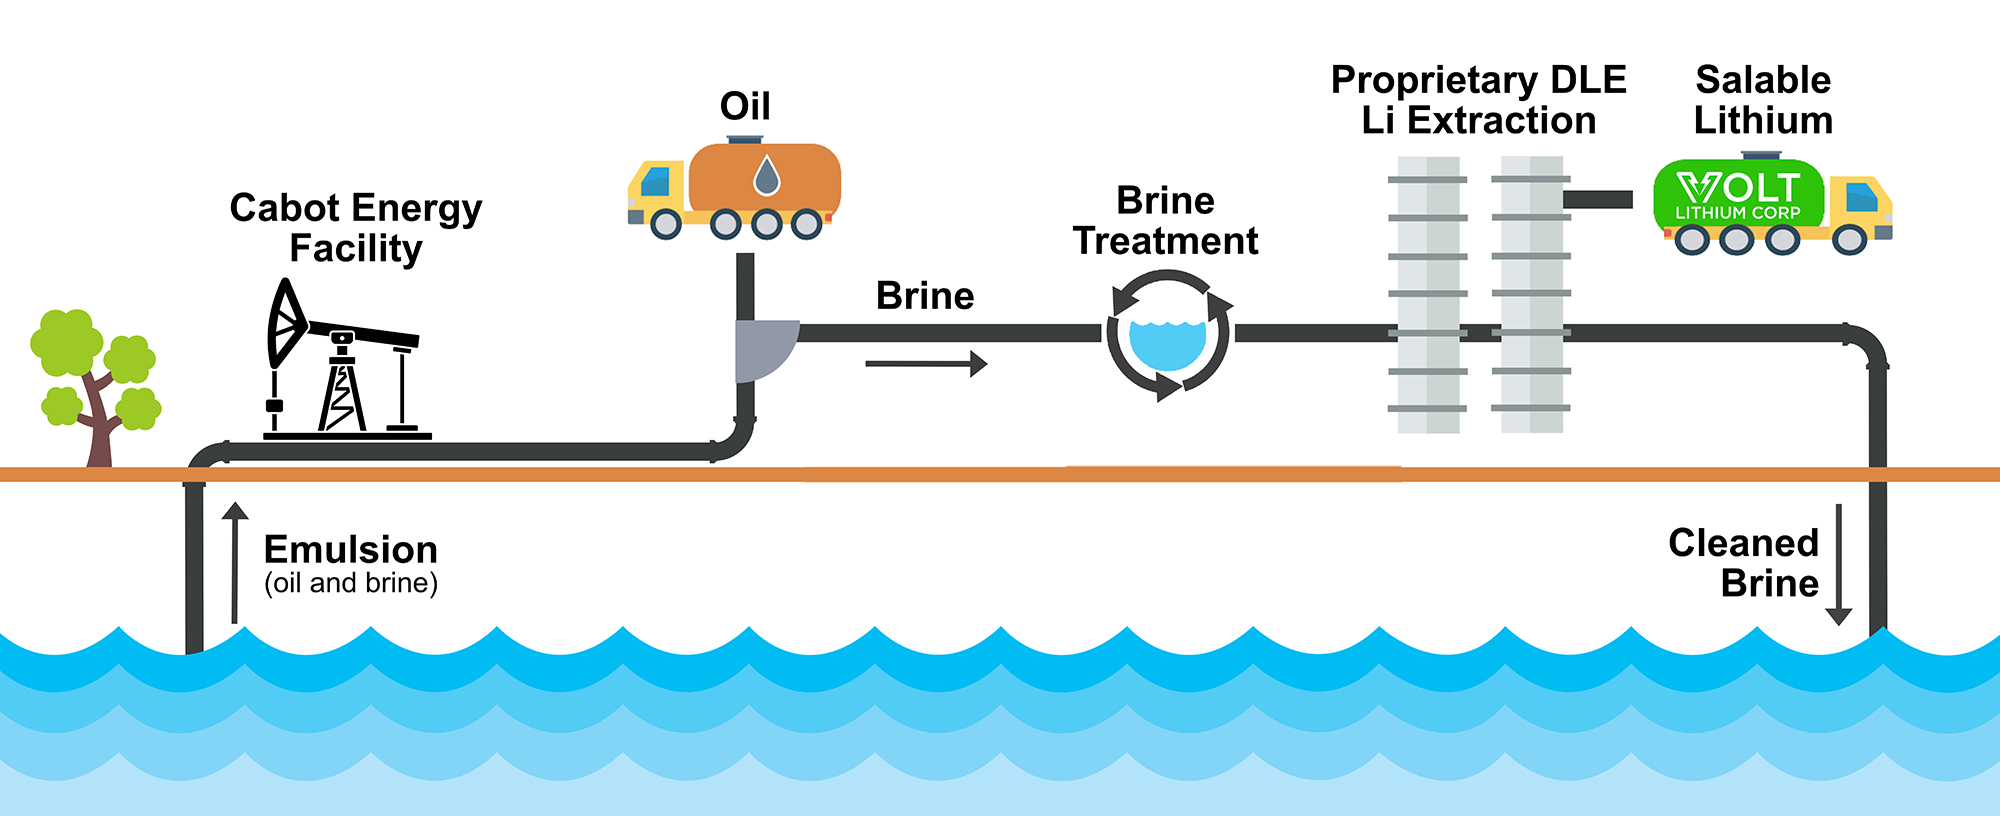 To remove lithium from oil field brine, Volt Lithium employs a pretreatment step followed by its proprietary process for direct lithium extraction. (Image courtesy of Volt Lithium)